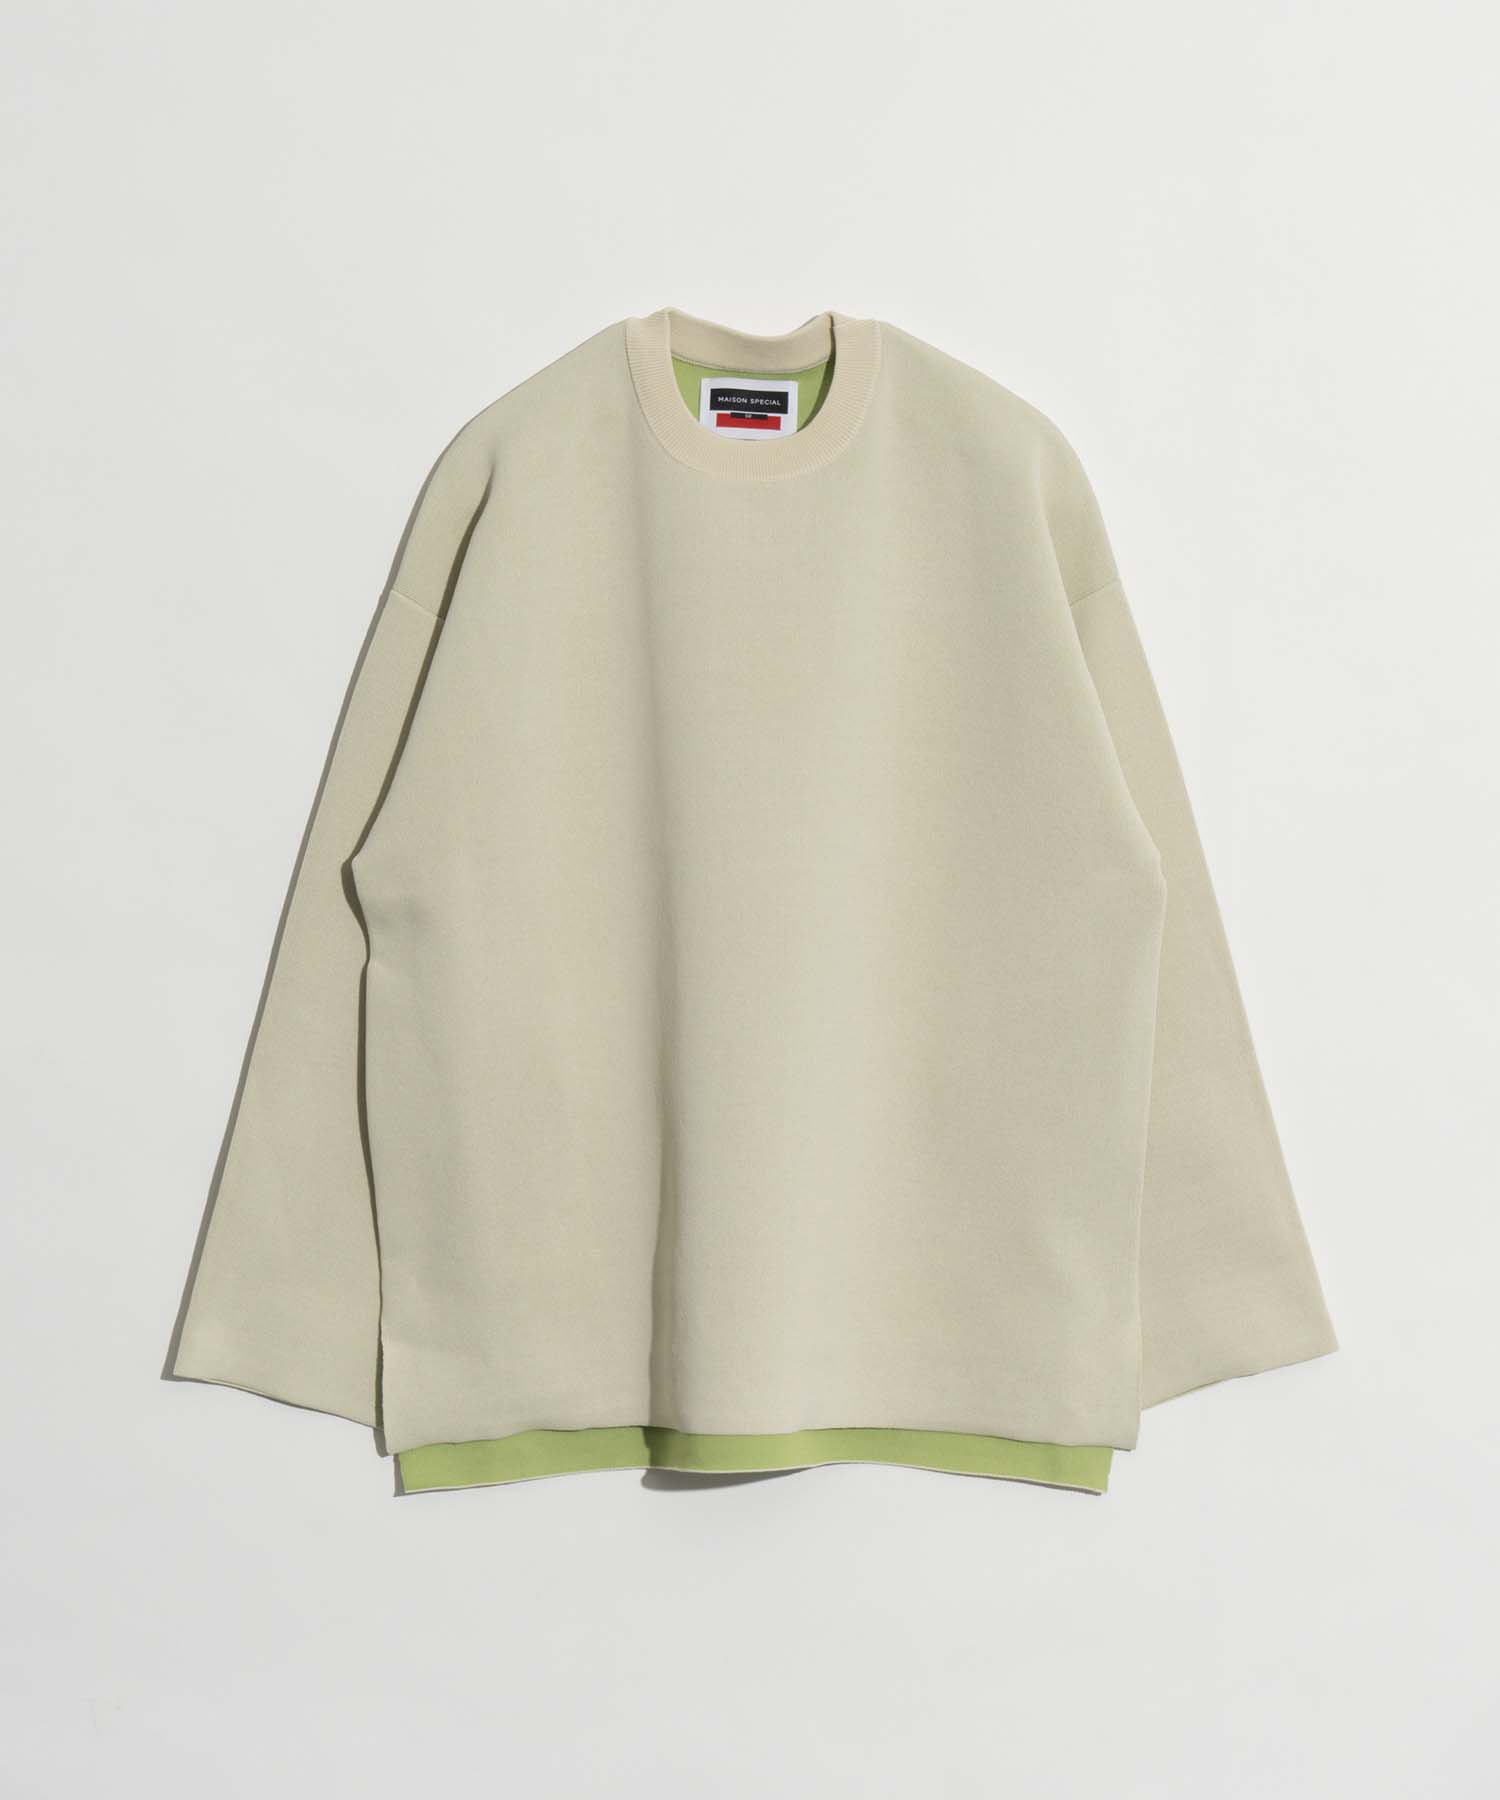 【SALE】Double-Face Knit Prime-Over Reversible Crew Neck Pullover